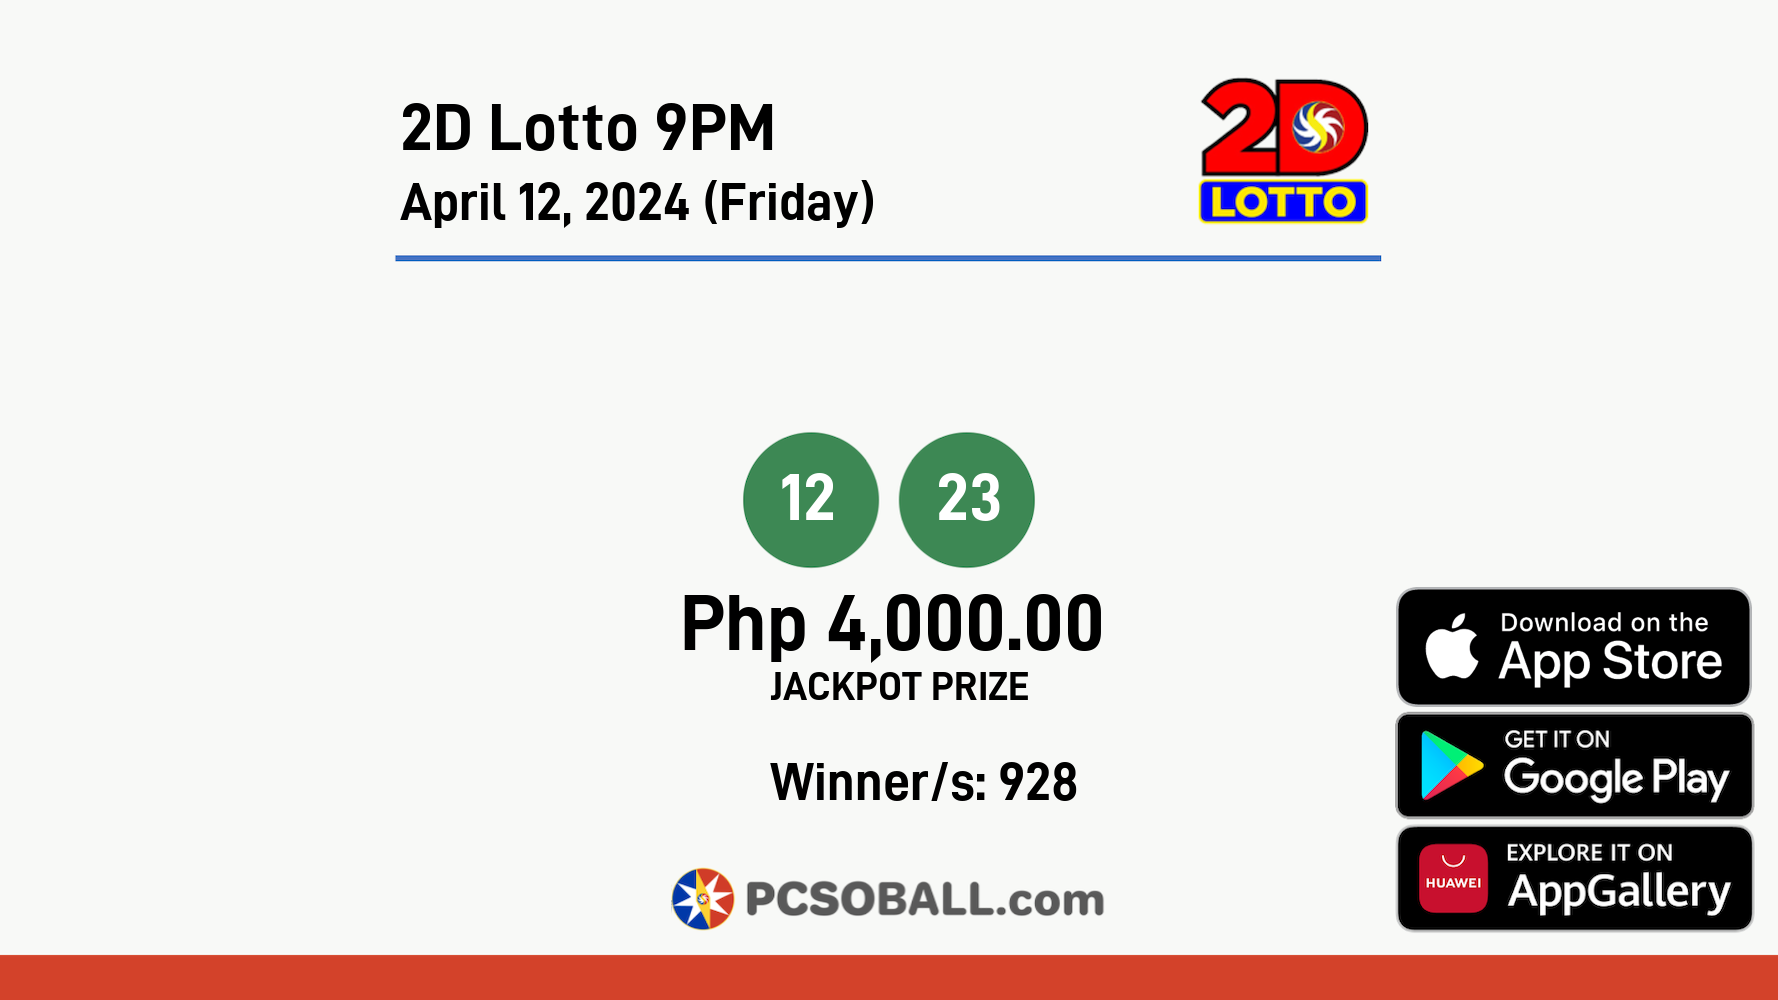 2D Lotto 9PM April 12, 2024 (Friday) Result